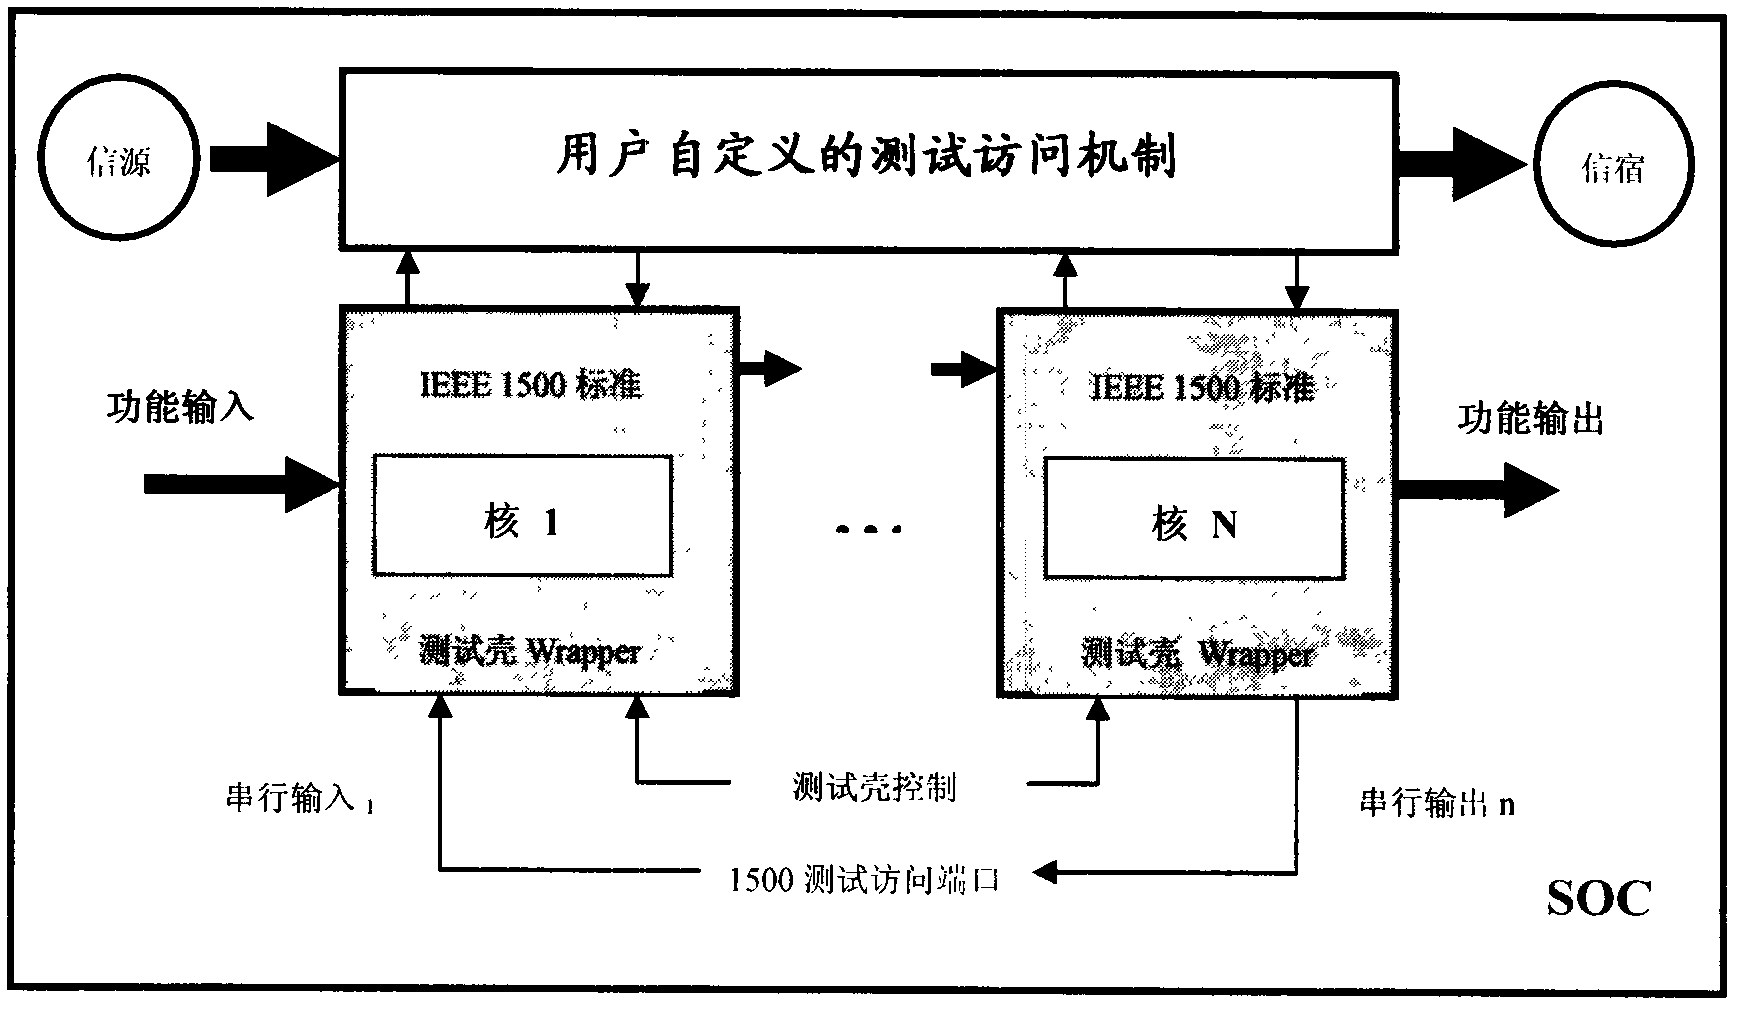 High-temperature wafer level burn-in test scheduling method for SoC (system on a chip) chip